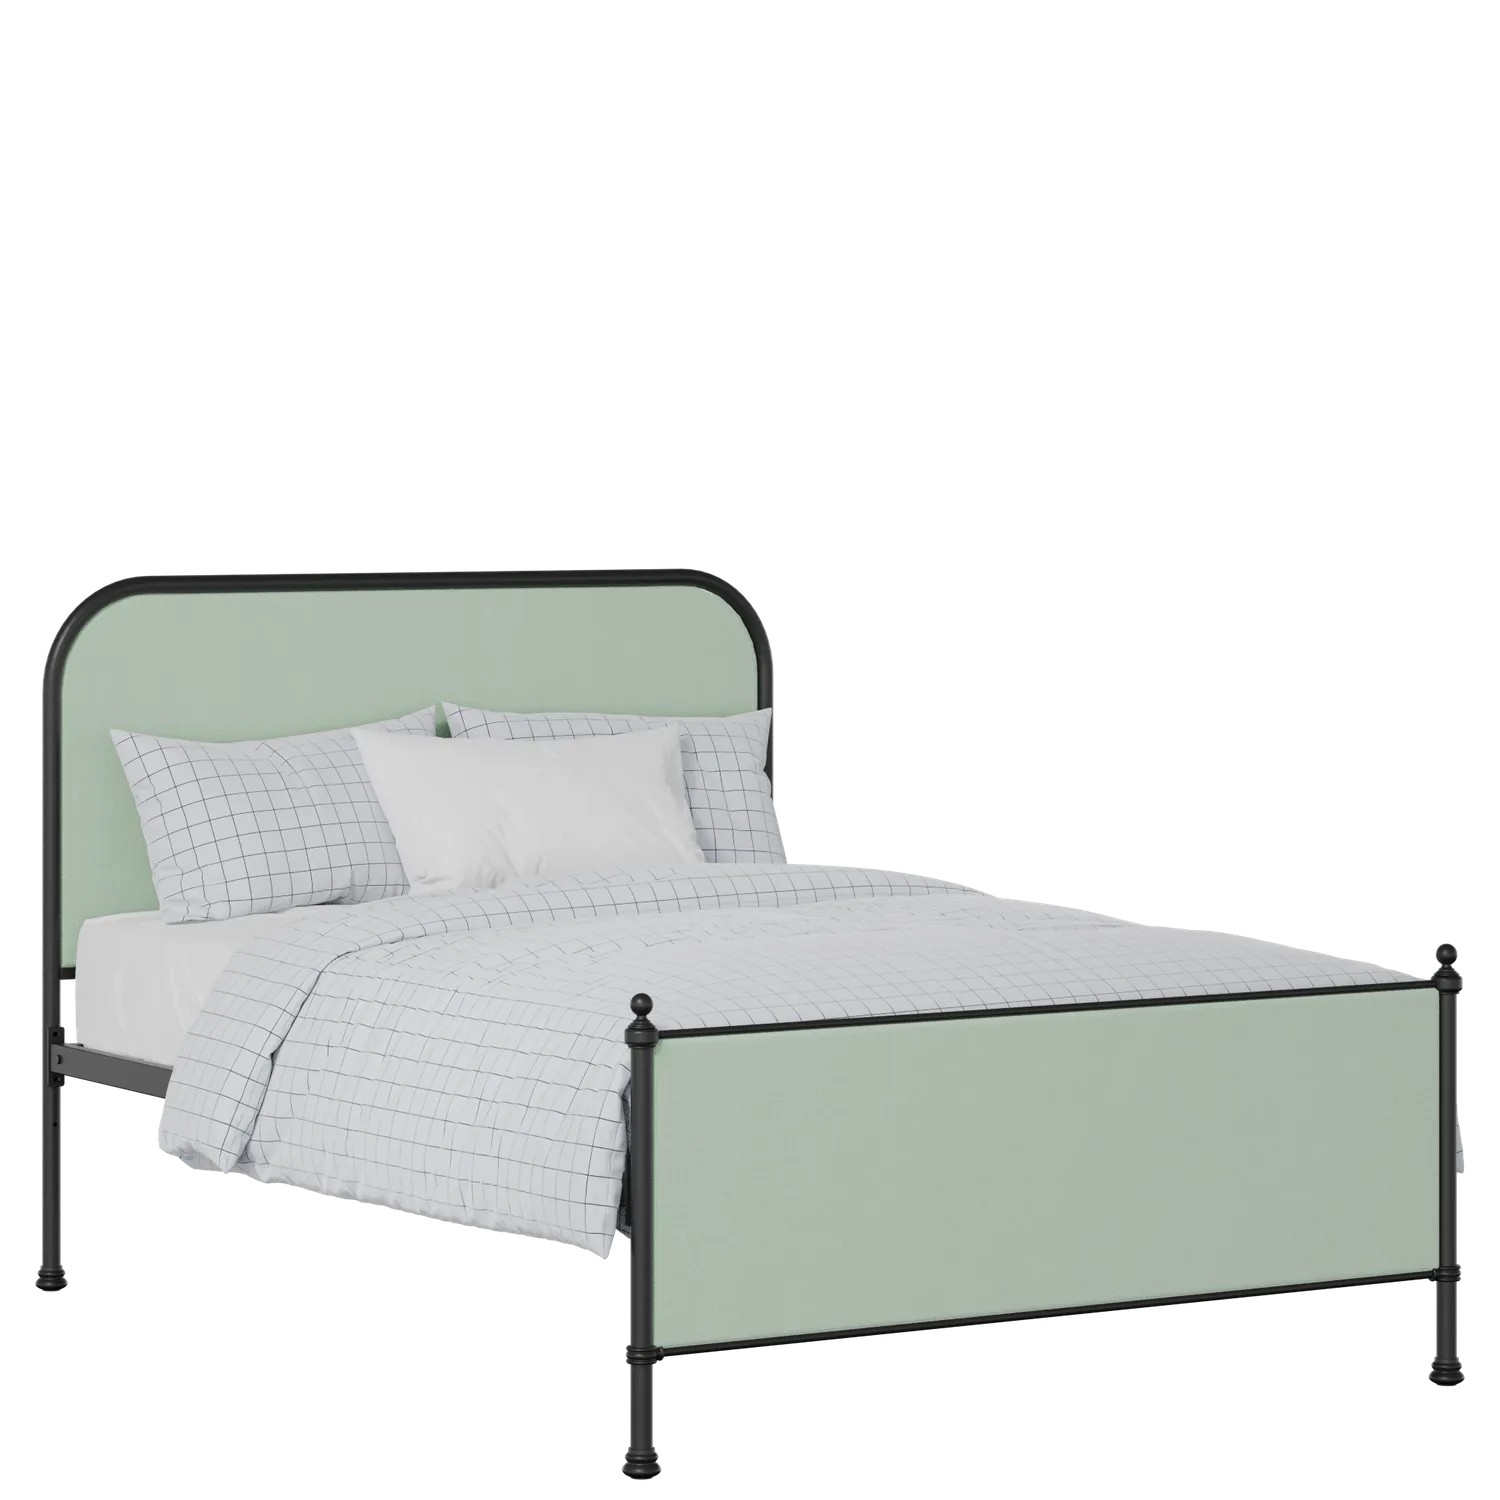 Bray iron/metal upholstered bed in black with mineral fabric